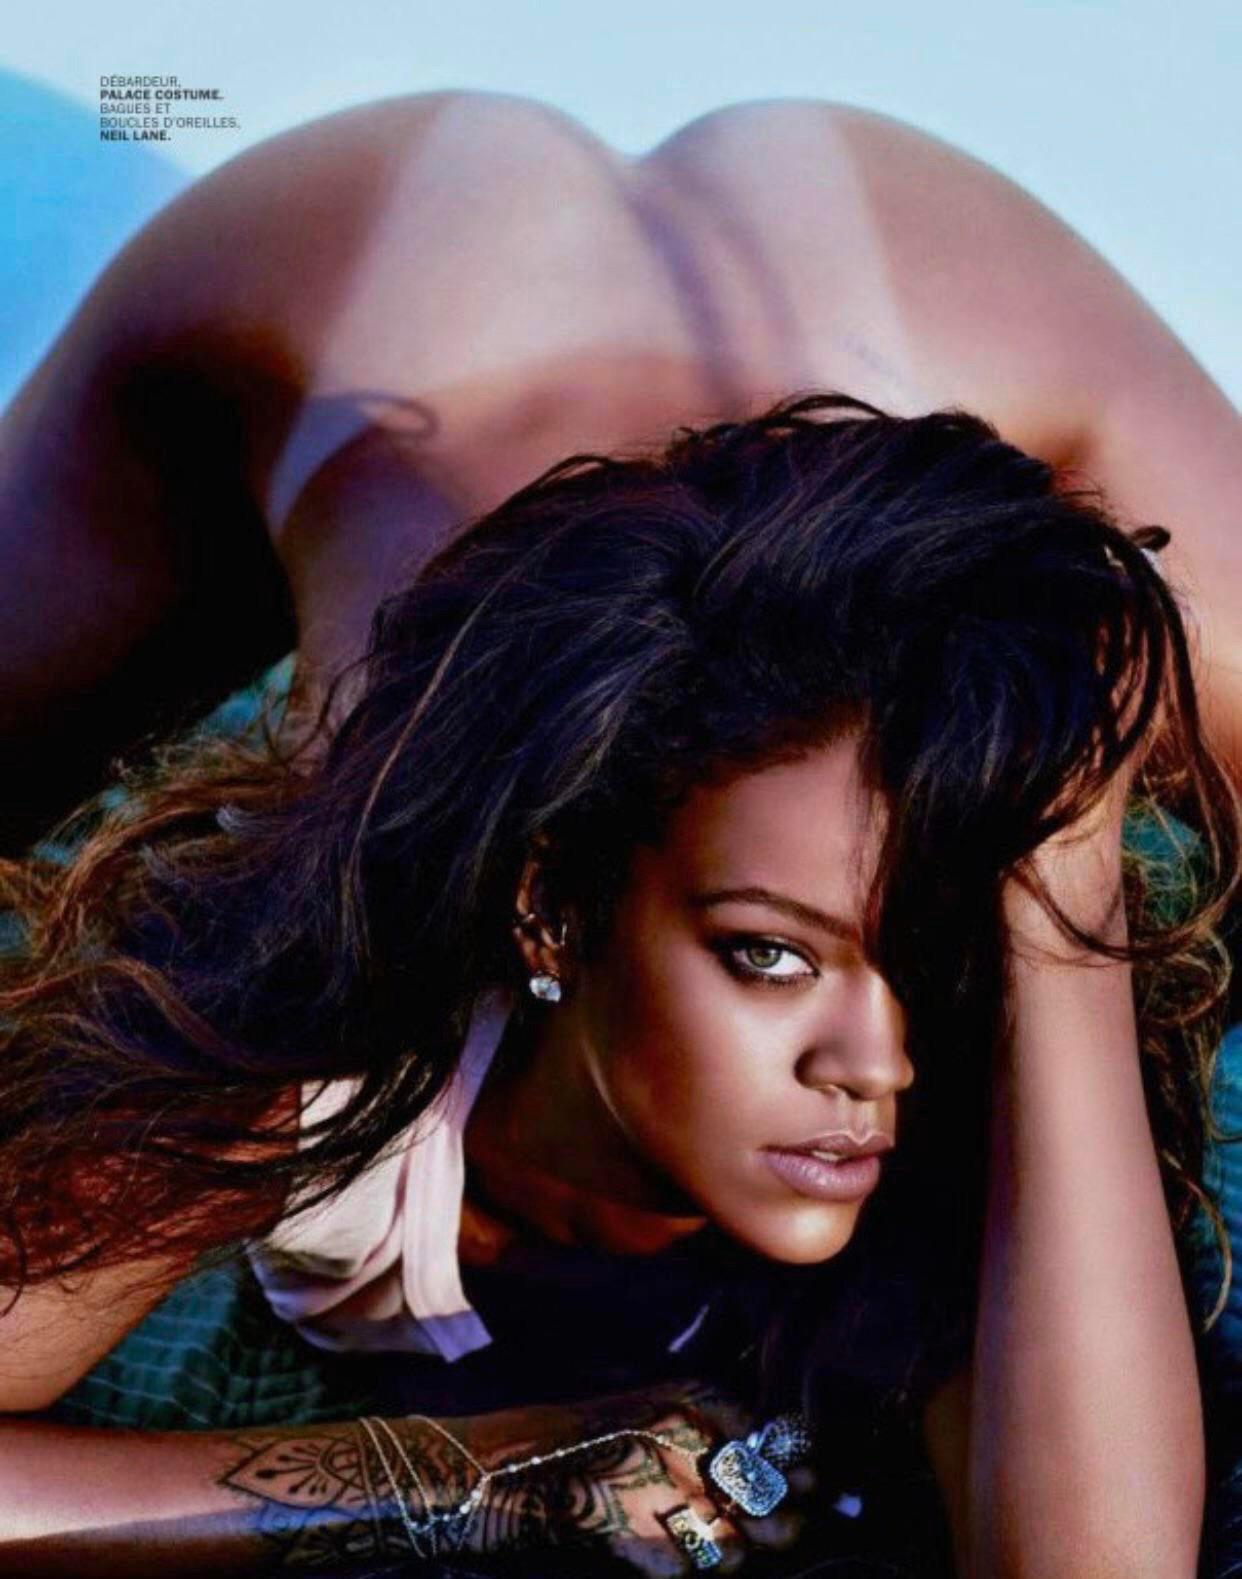 My favorite pic of Rihanna. I bet her asshole is wide and spread